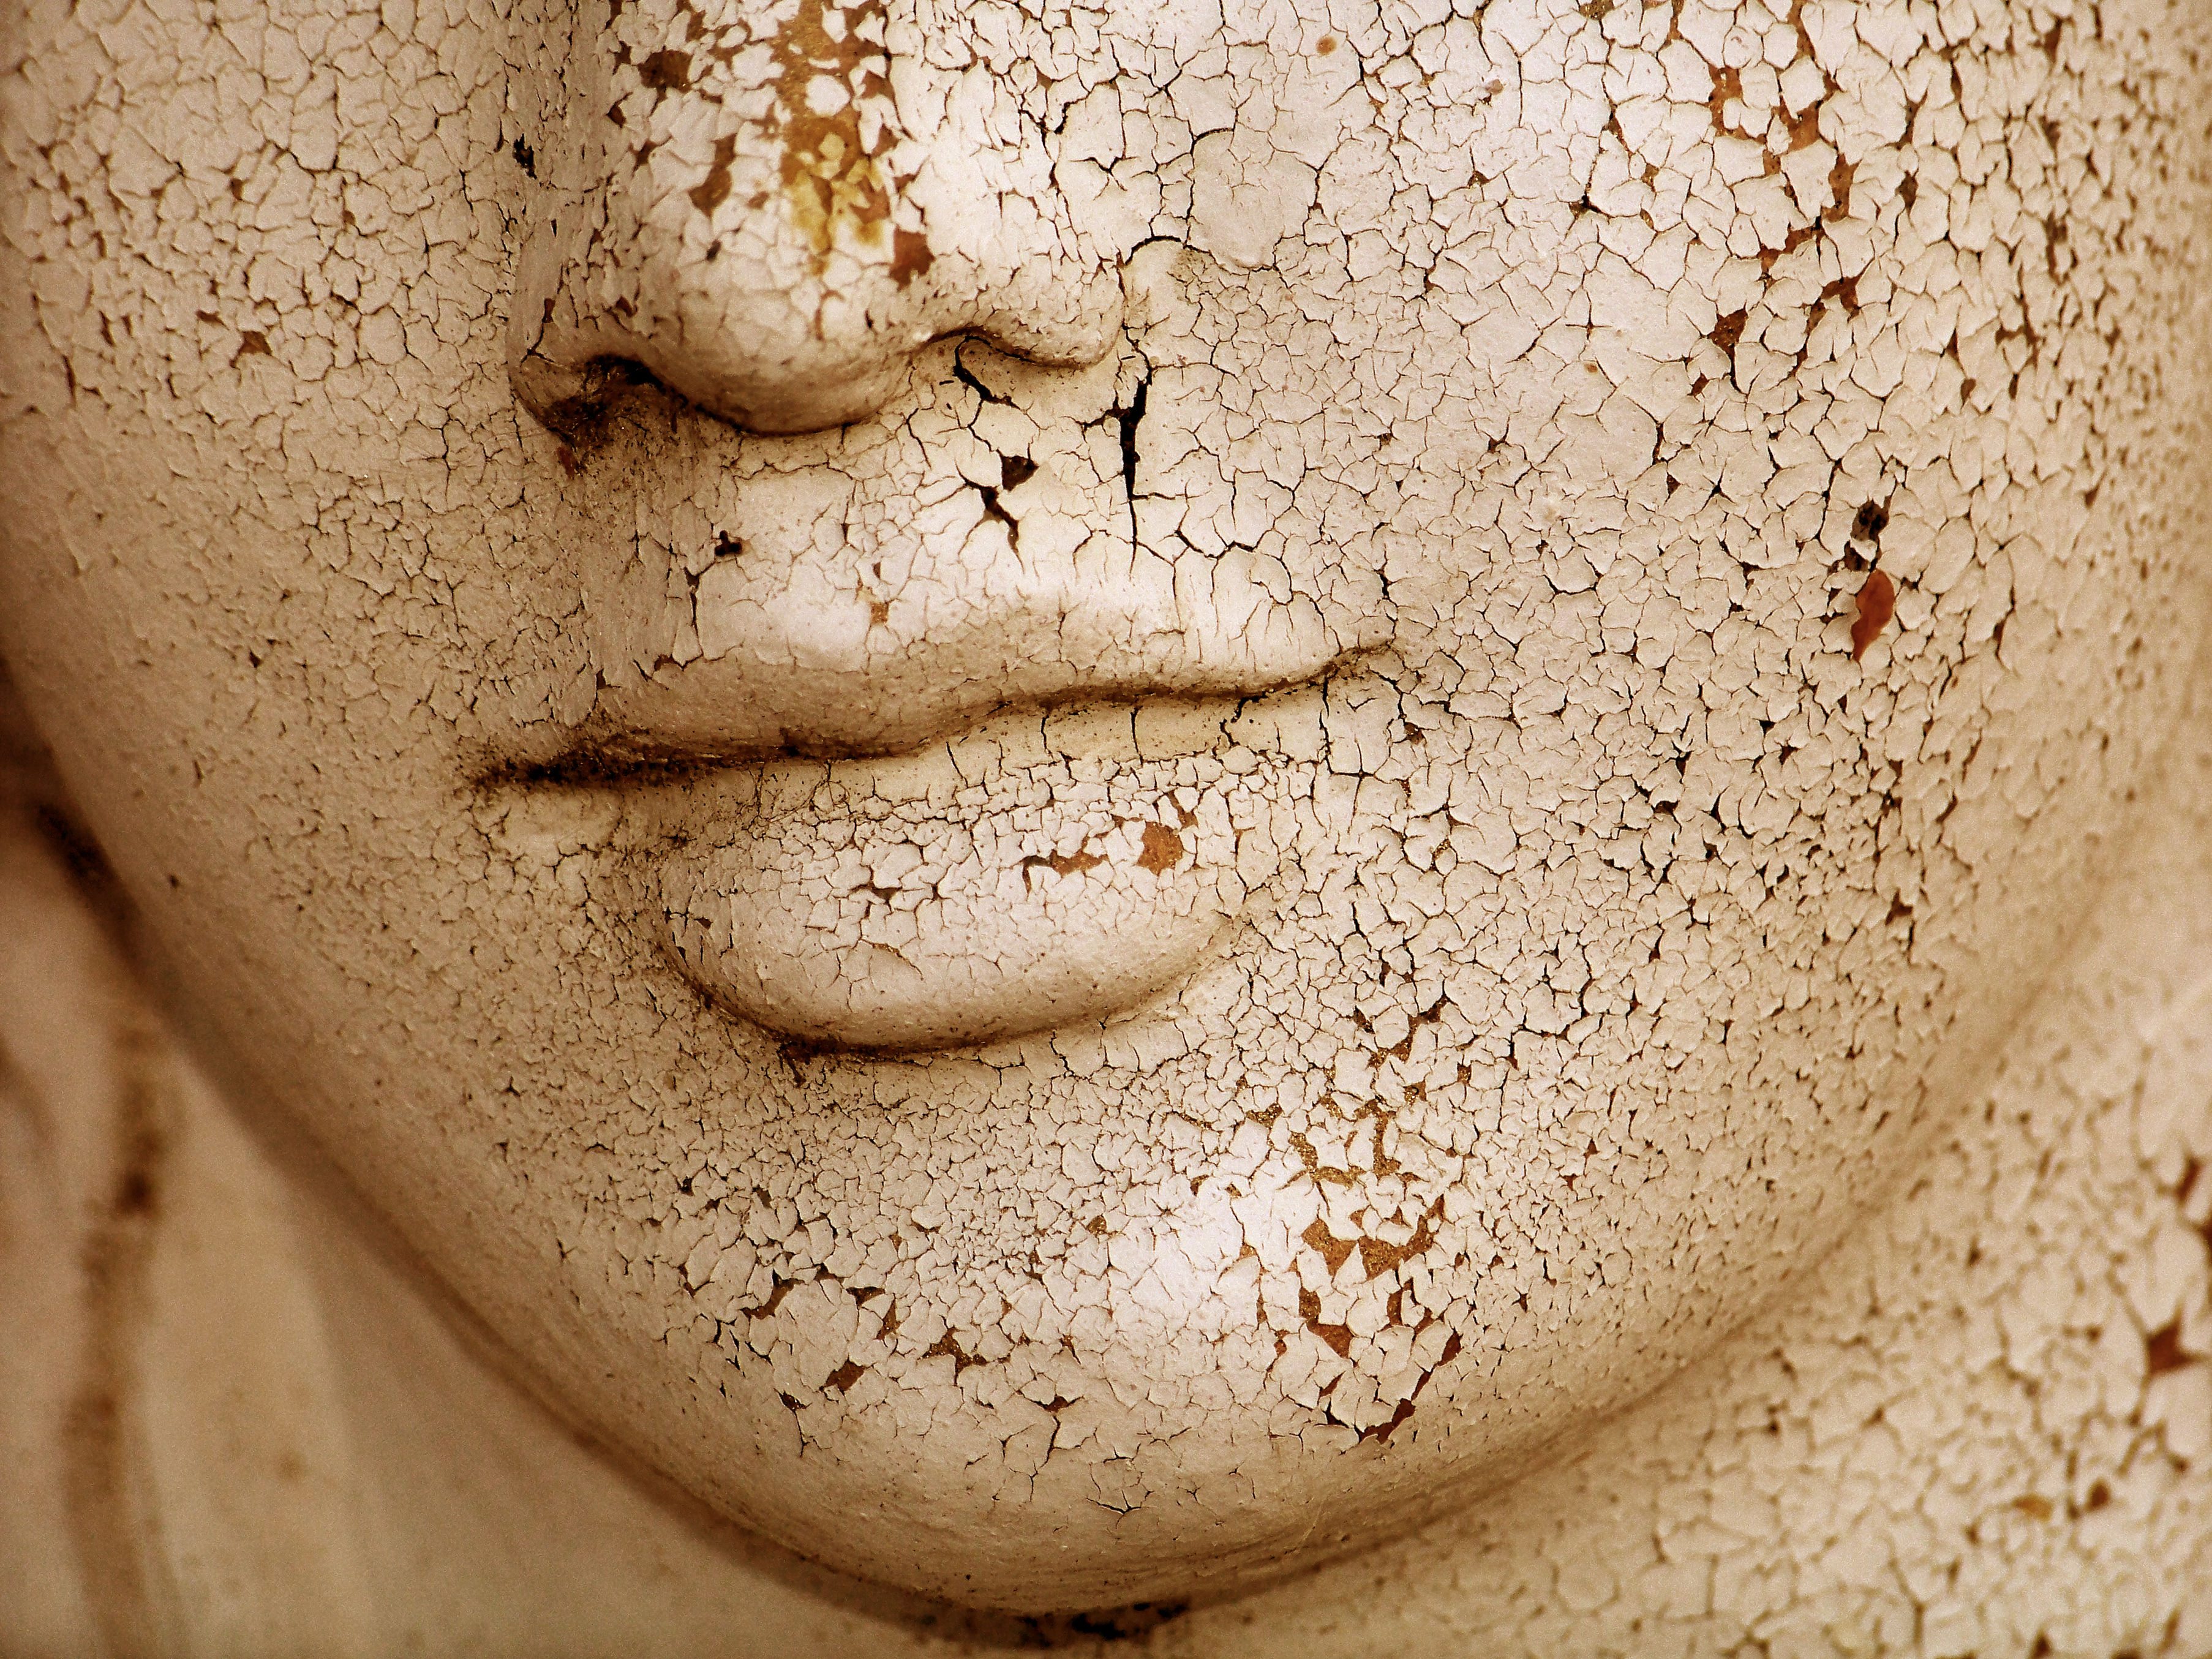 51448039 - dried skin cracked woman sculptural face close up